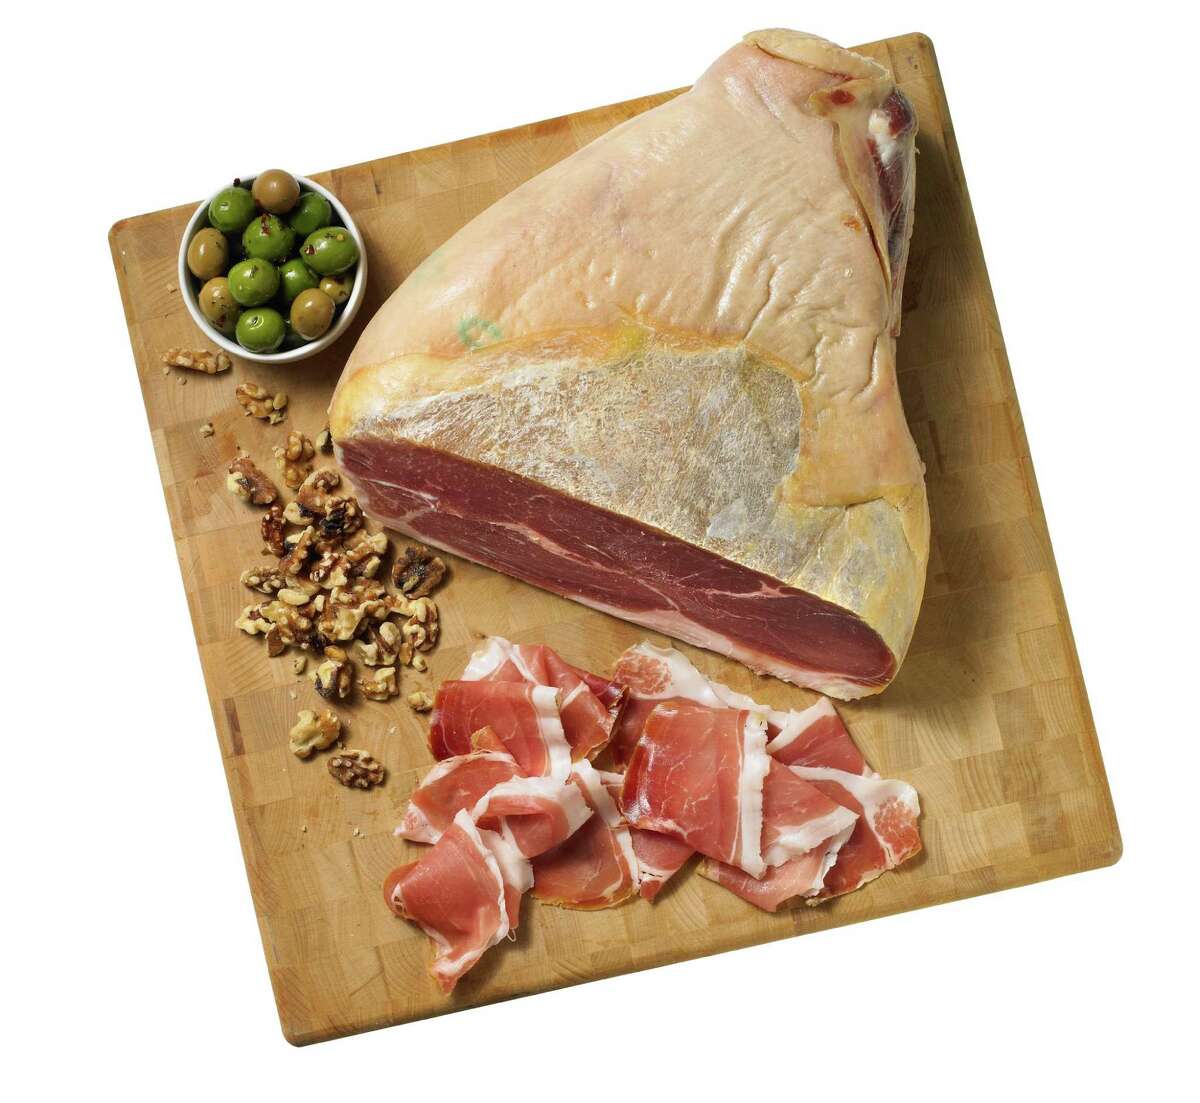 Beginning Nov. 11 Central Market will be the exclusive Texas retailer for Le Jambon de Bayonne, a dry-cured French ham from the ancient city of Bayonne. It sells for $28.99 a pound.